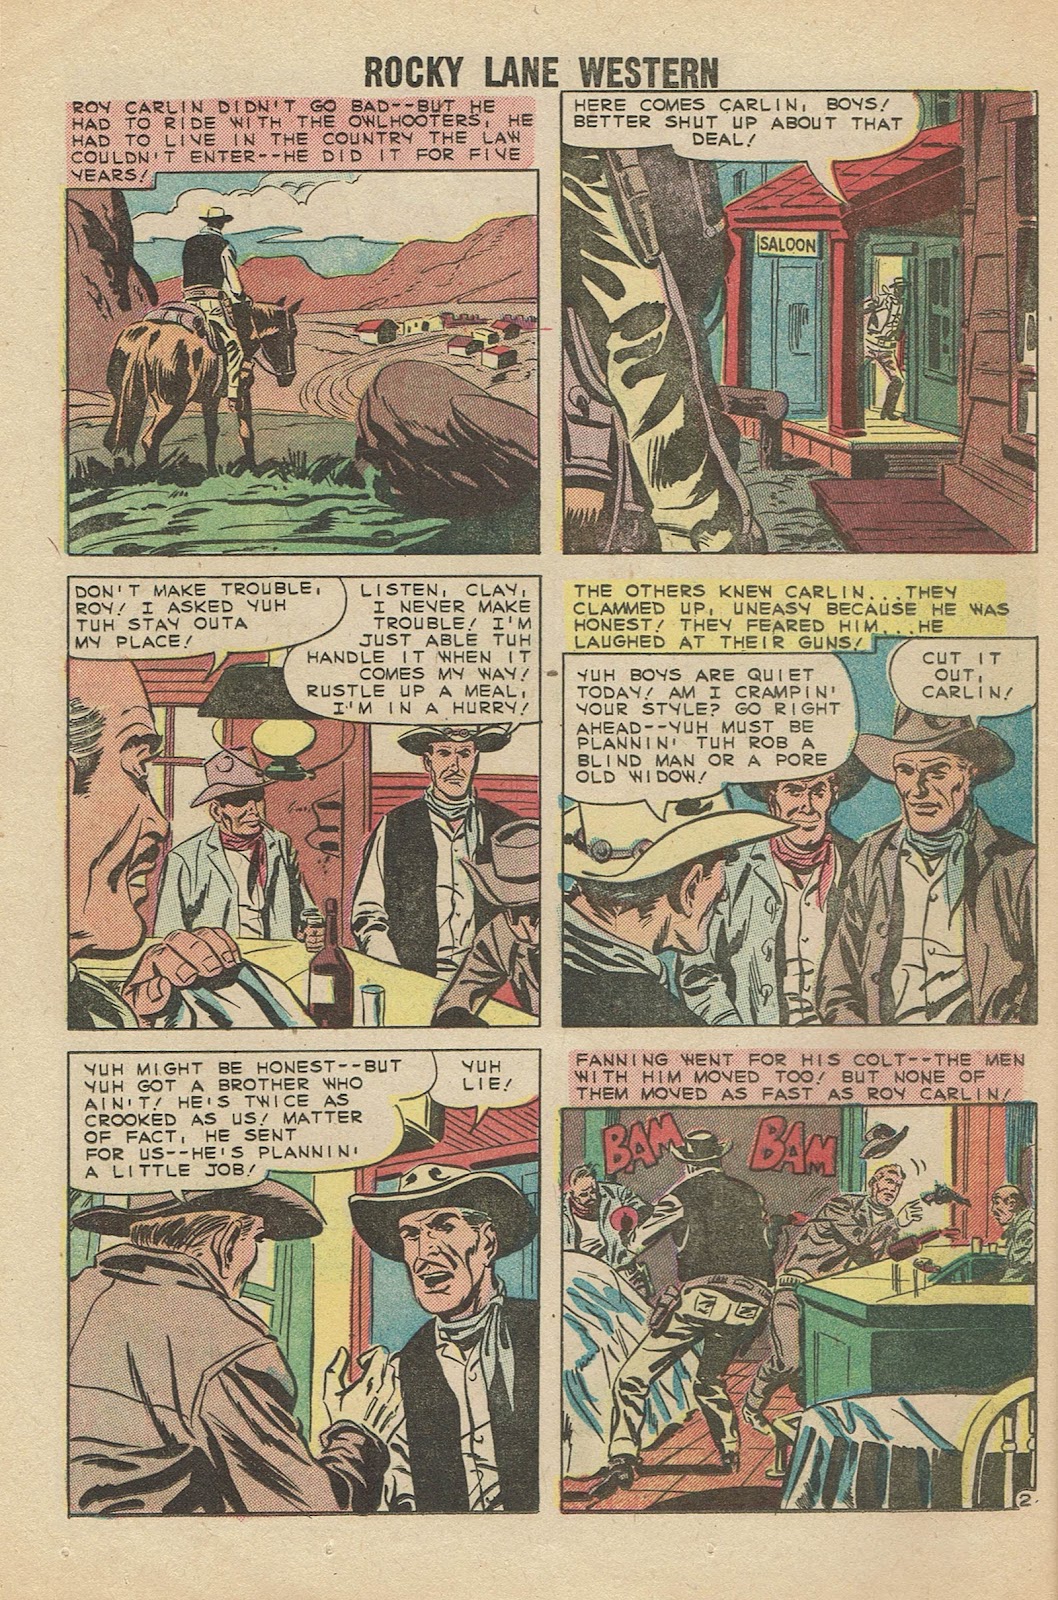 Rocky Lane Western (1954) issue 85 - Page 24